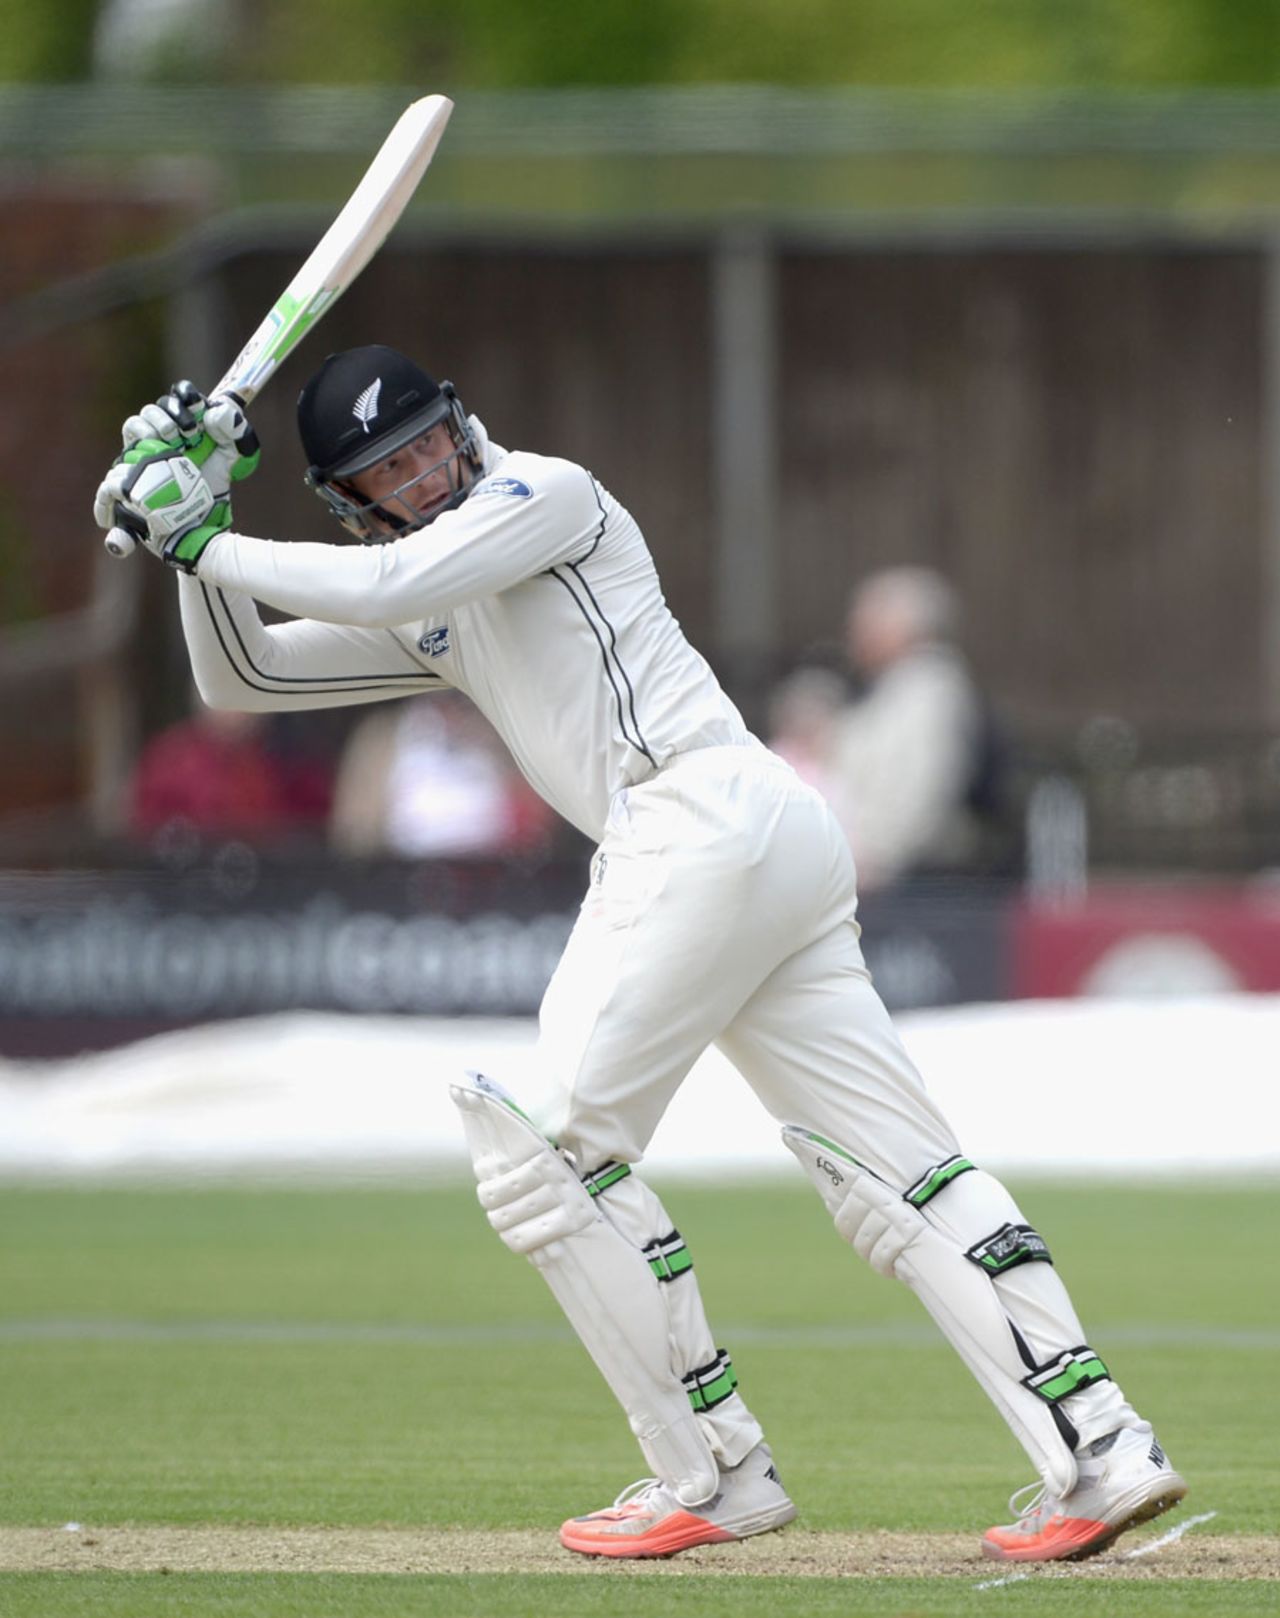 Martin Guptill made 35 in his first innings on tour, Worcestershire v New Zealanders, Tour match, New Road, 2nd day, May 15, 2015